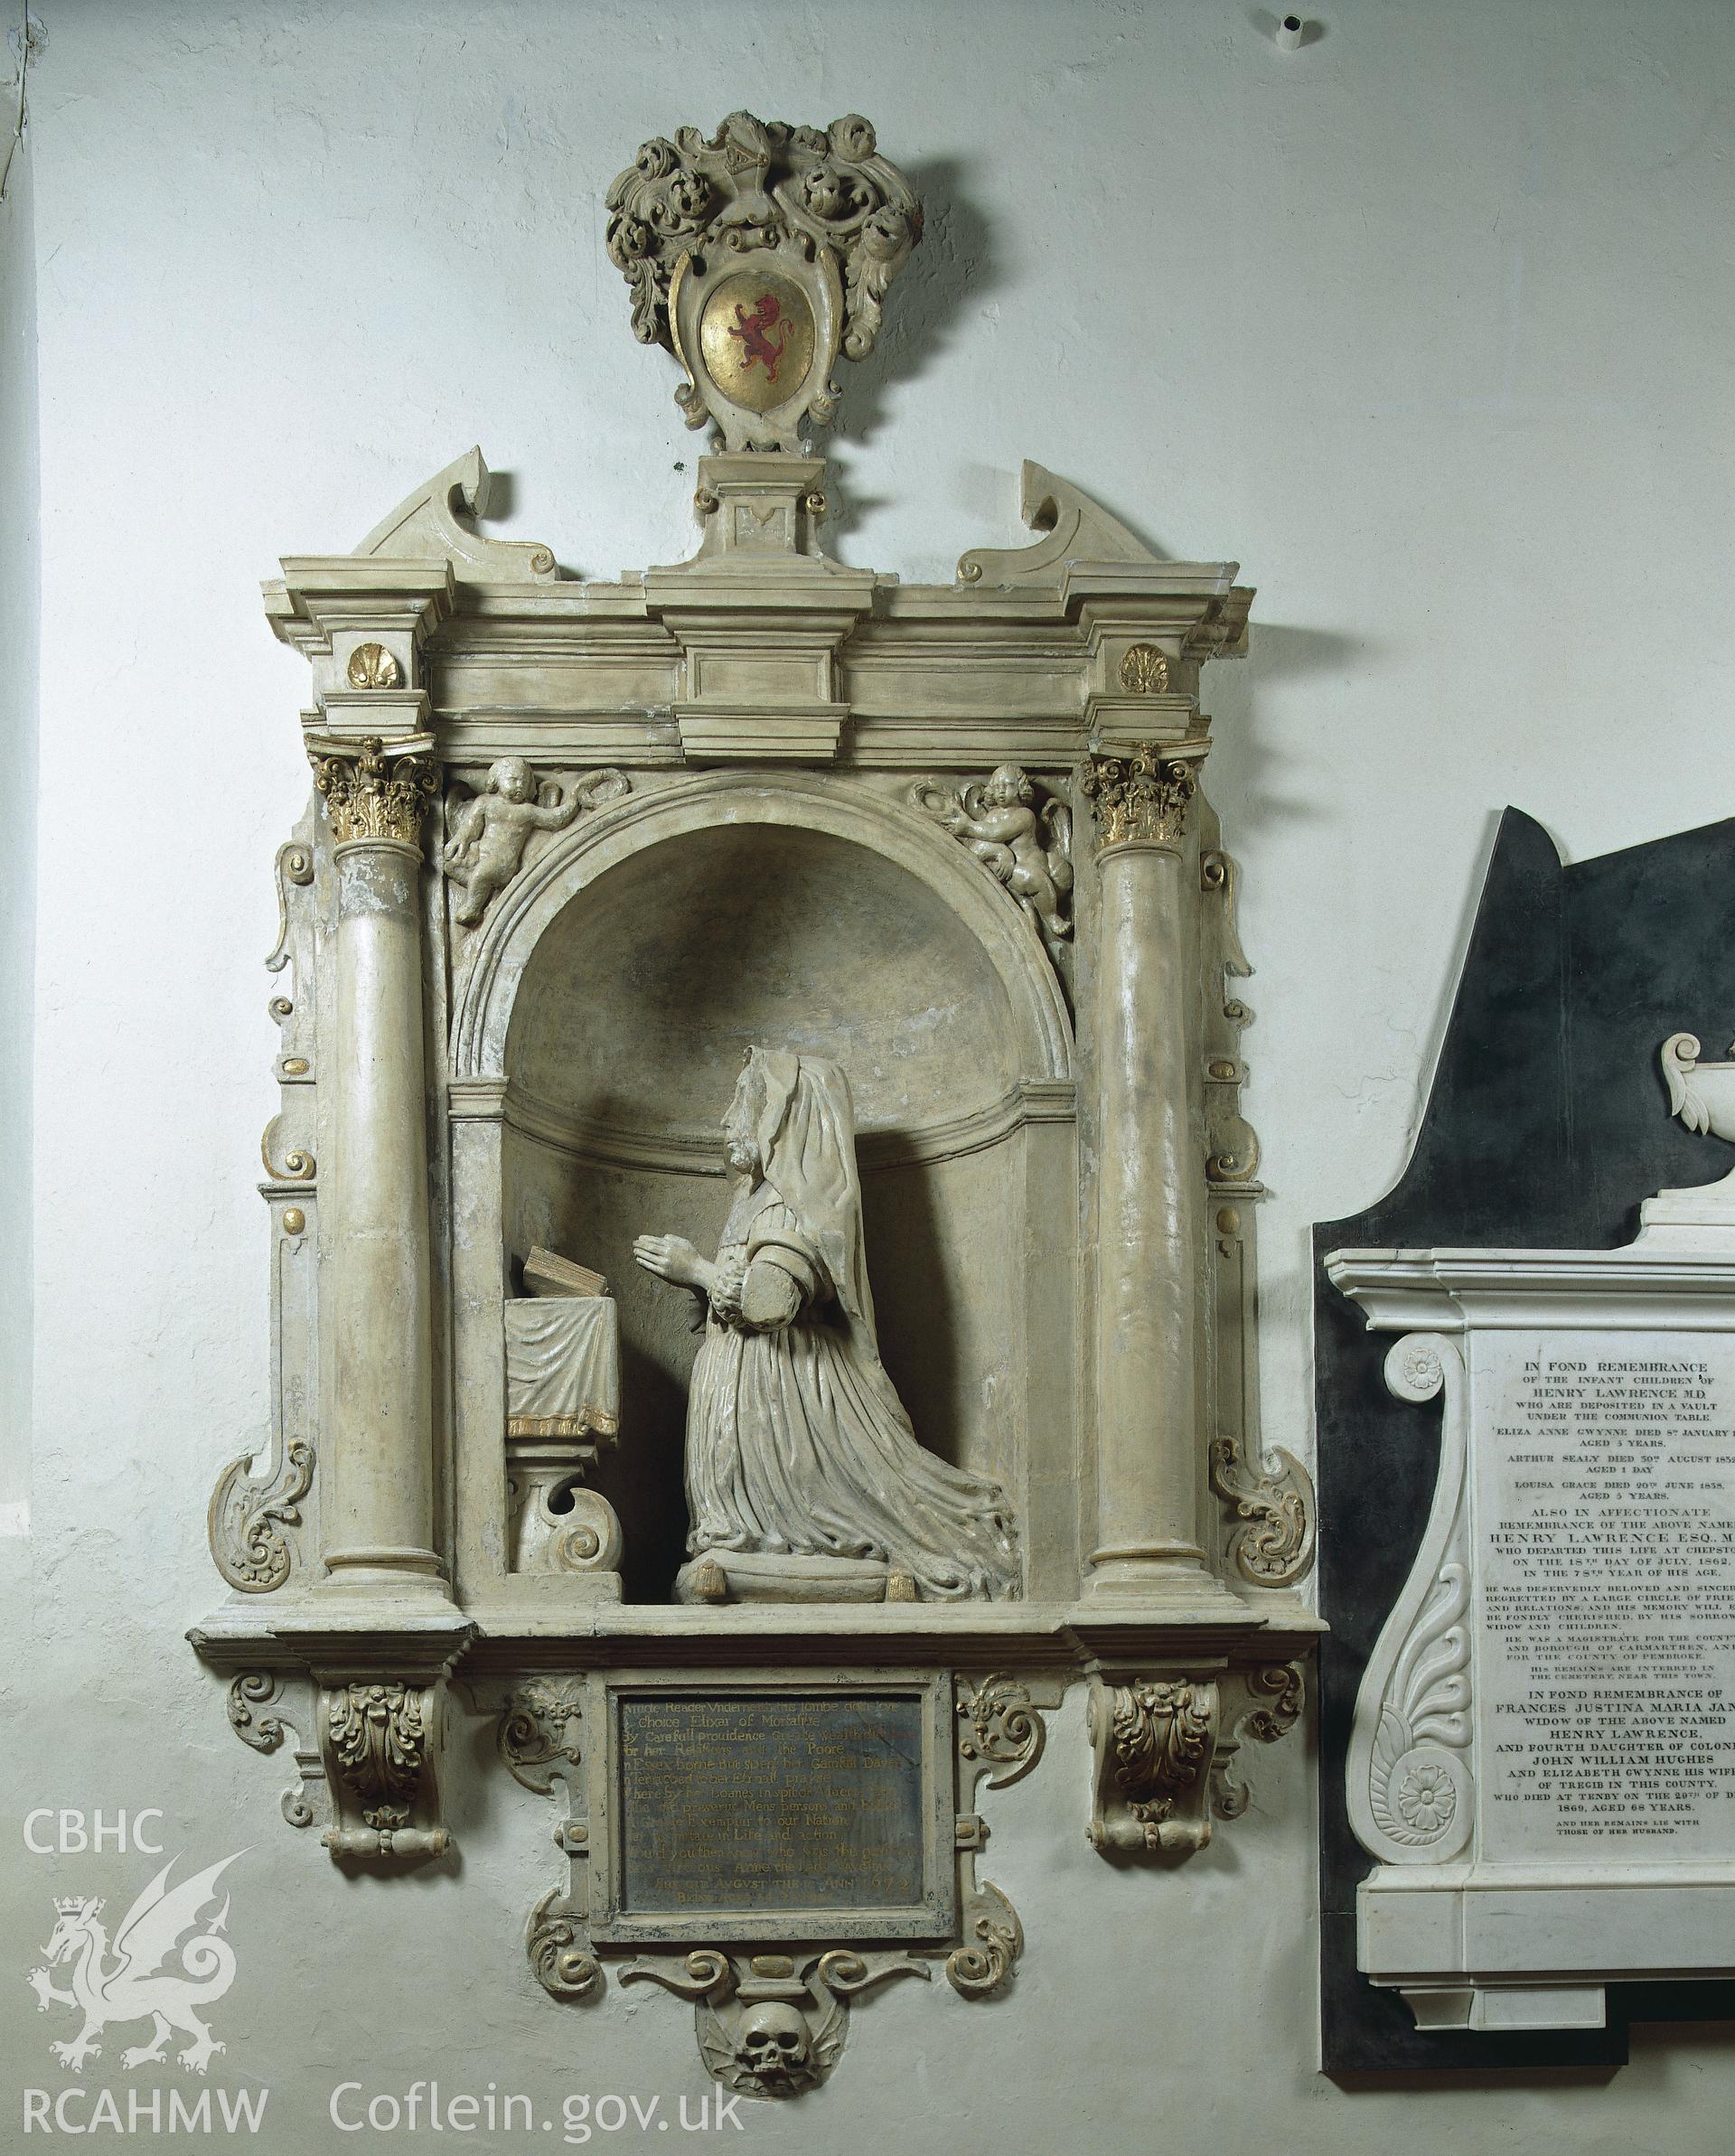 RCAHMW colour transparency showing detail of a monument to Lady Vaughan, in St Peter's Church, Carmarthen.